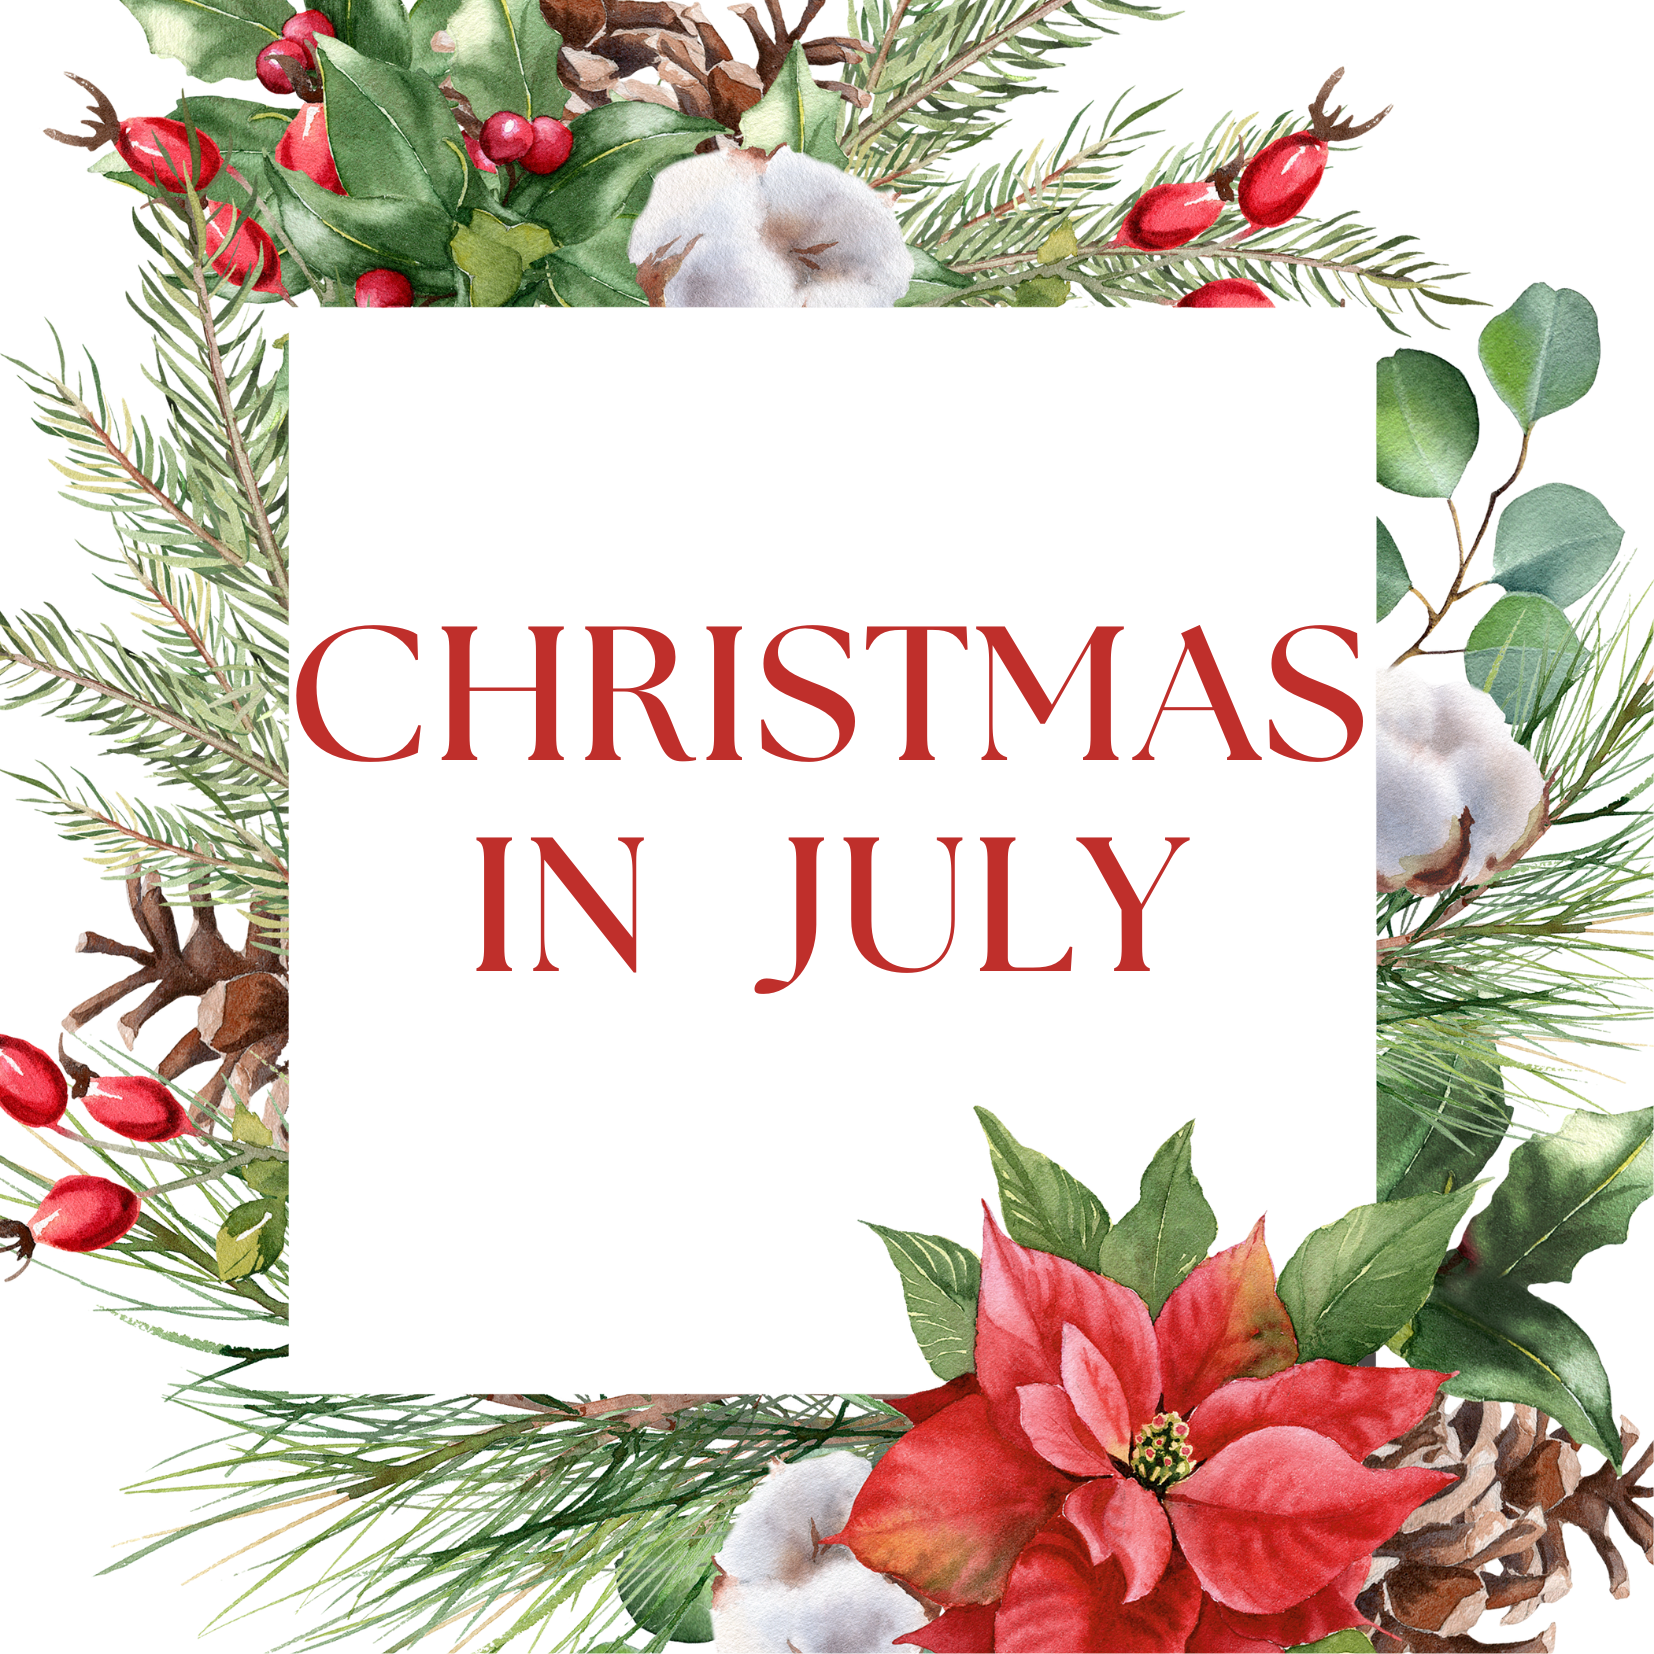 Copy of christmas in july.png